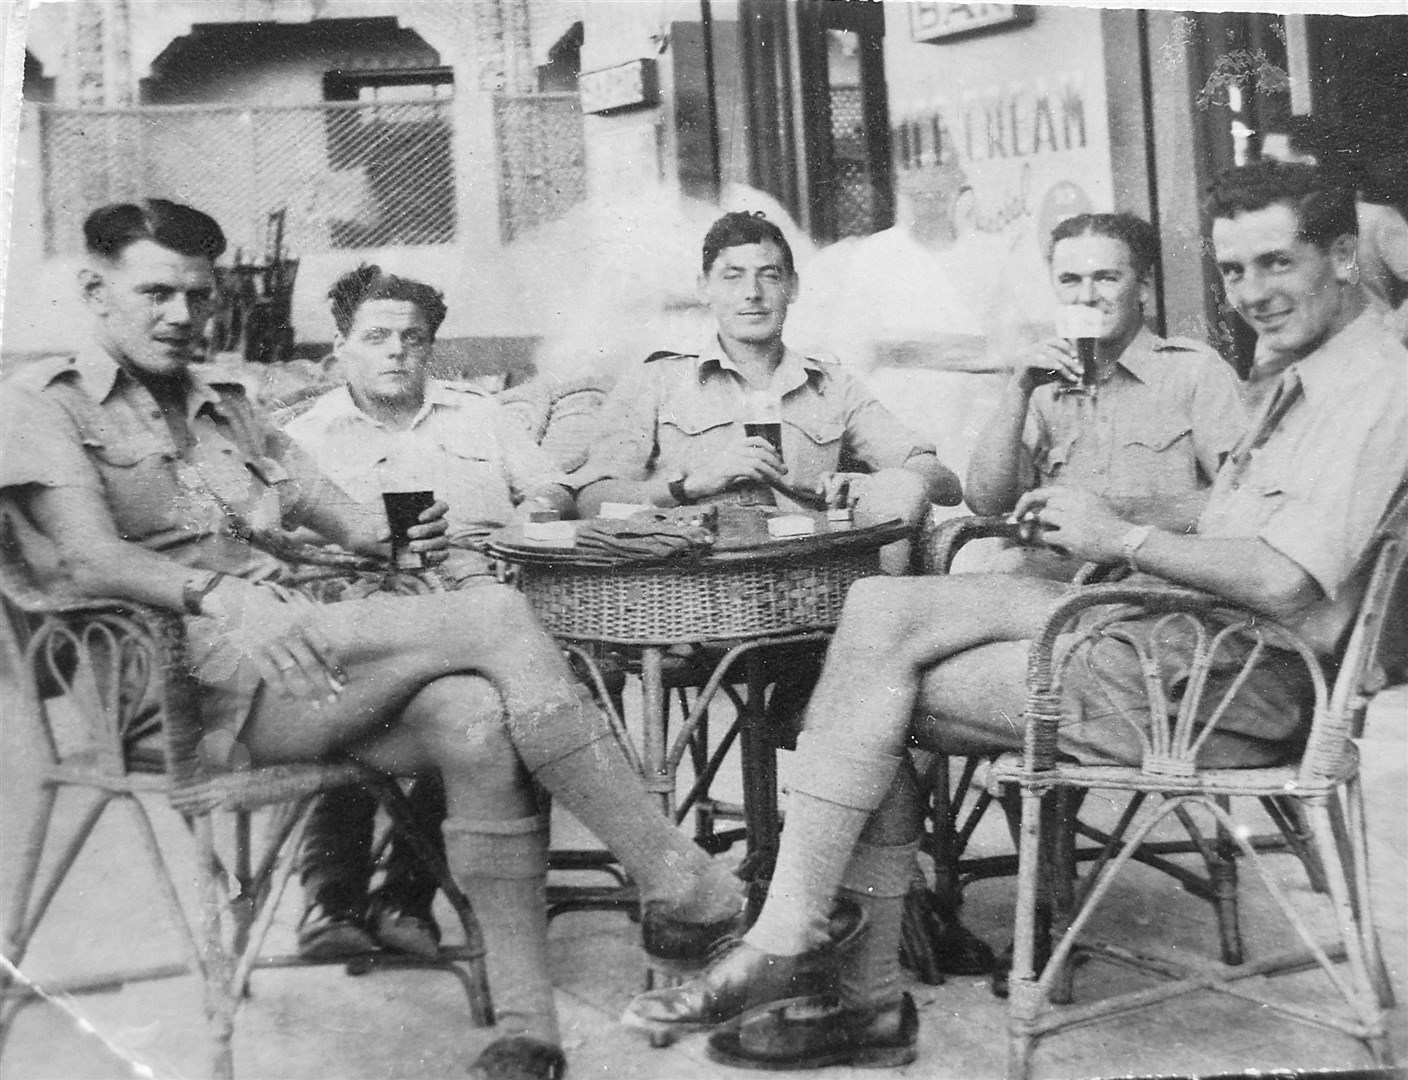 Ron Chapman (far left) - likely Bahrein in 1943. Note the rank leather wrist strap, worn when in short sleeves.